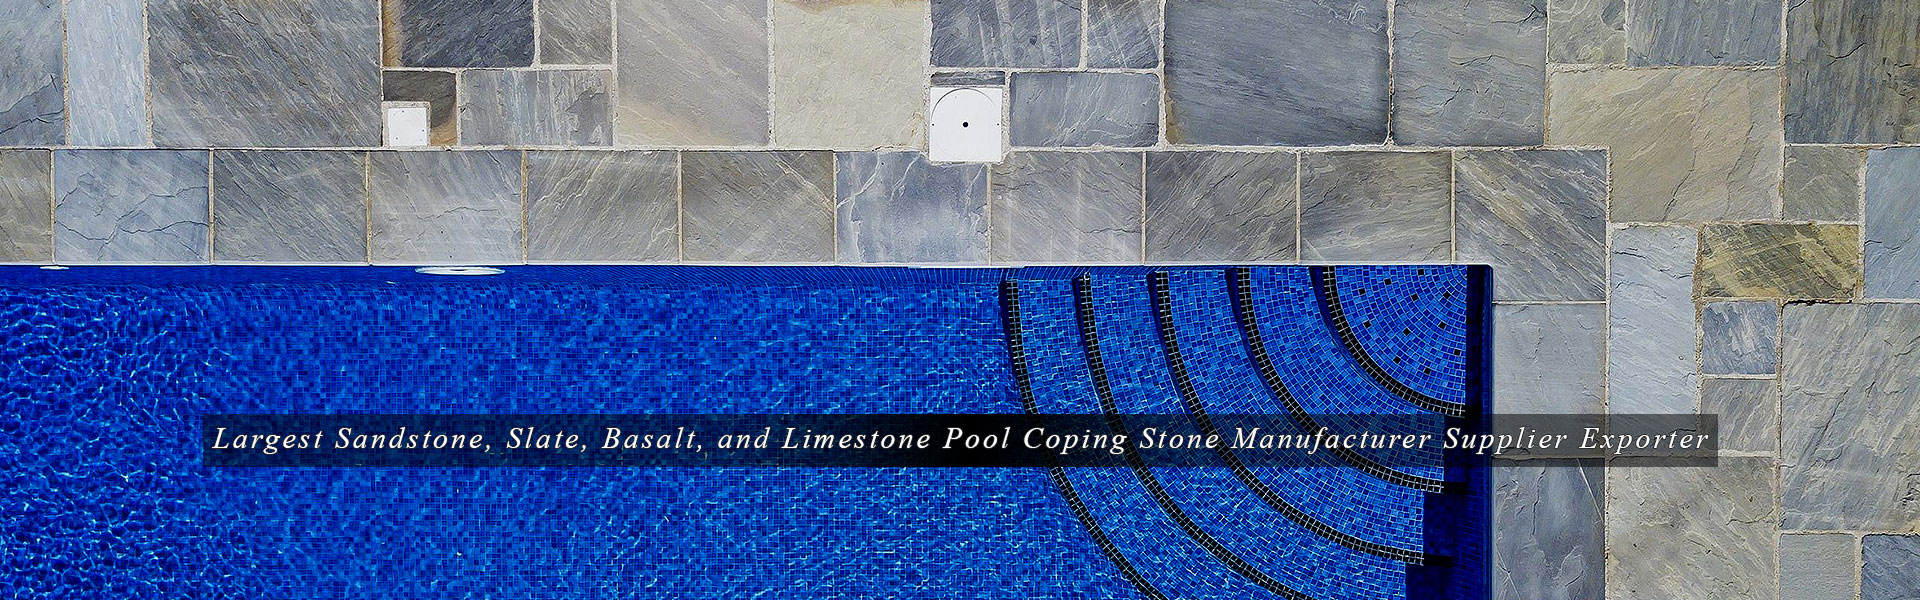 Pool Coping Suppliers in India